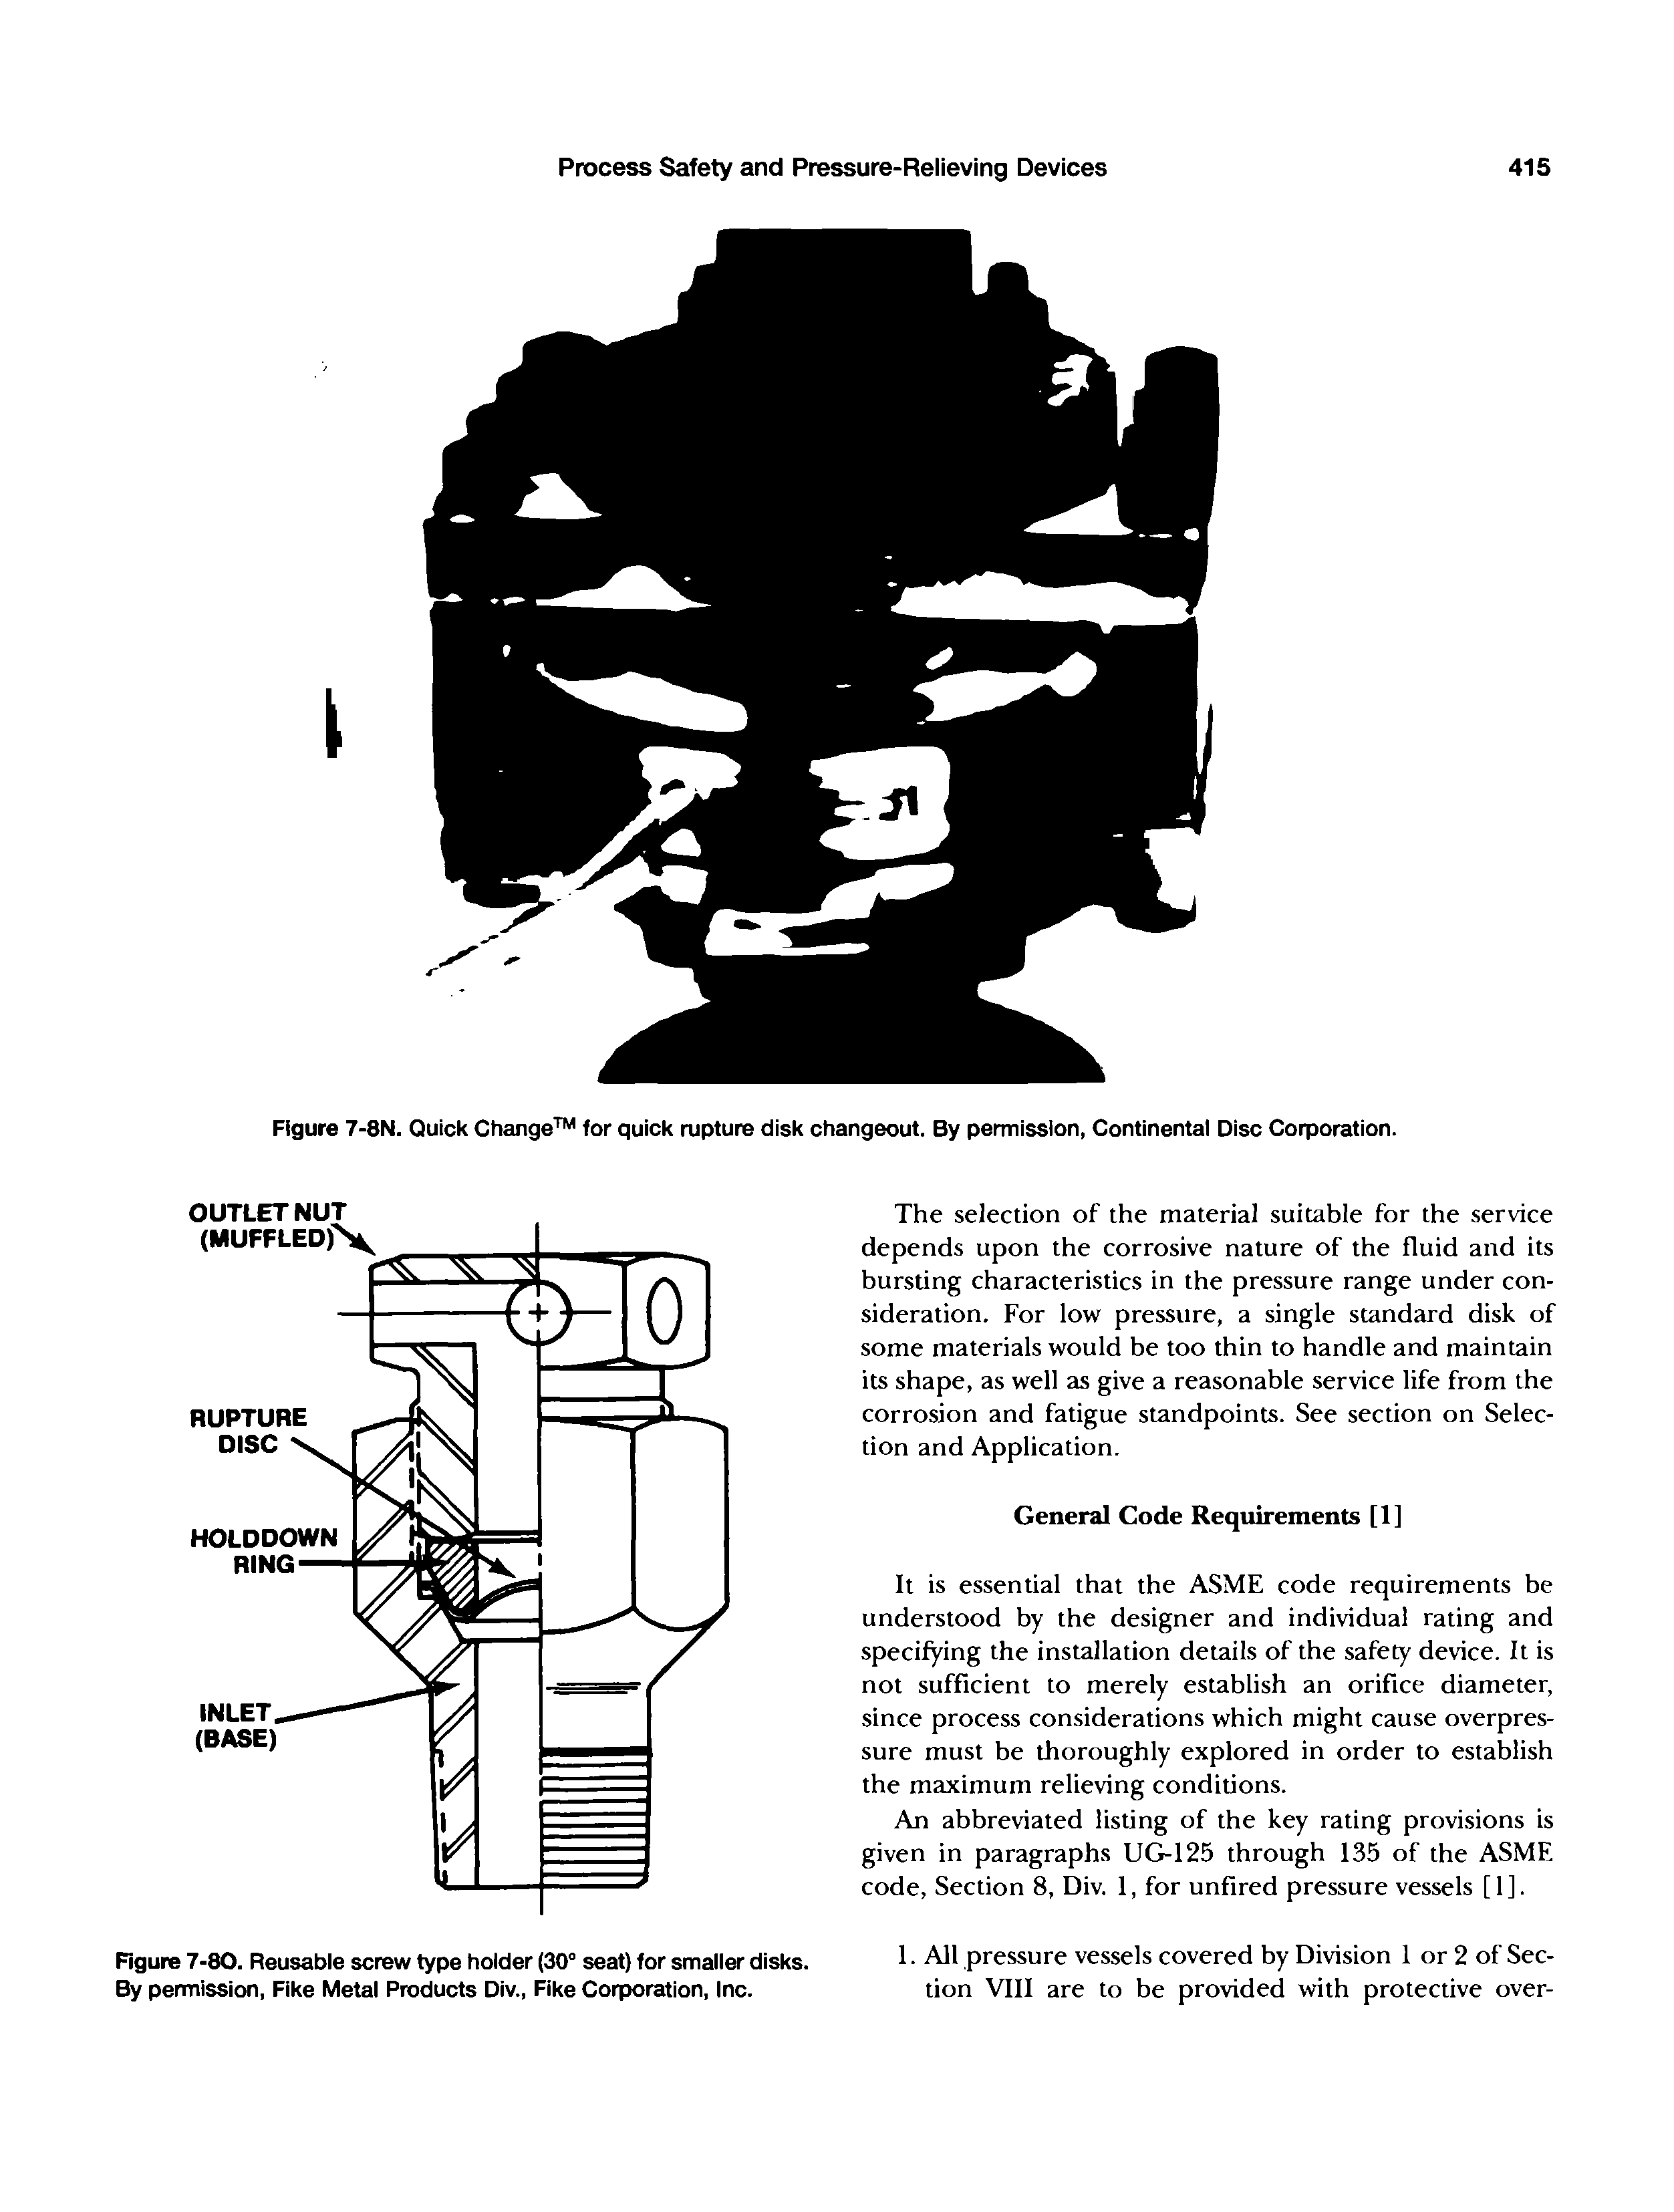 Figure 7-80. Reusable screw type holder (30° seat) for smaller disks. By permission, Fike Metal Products Div., Fike Corporation, Inc.